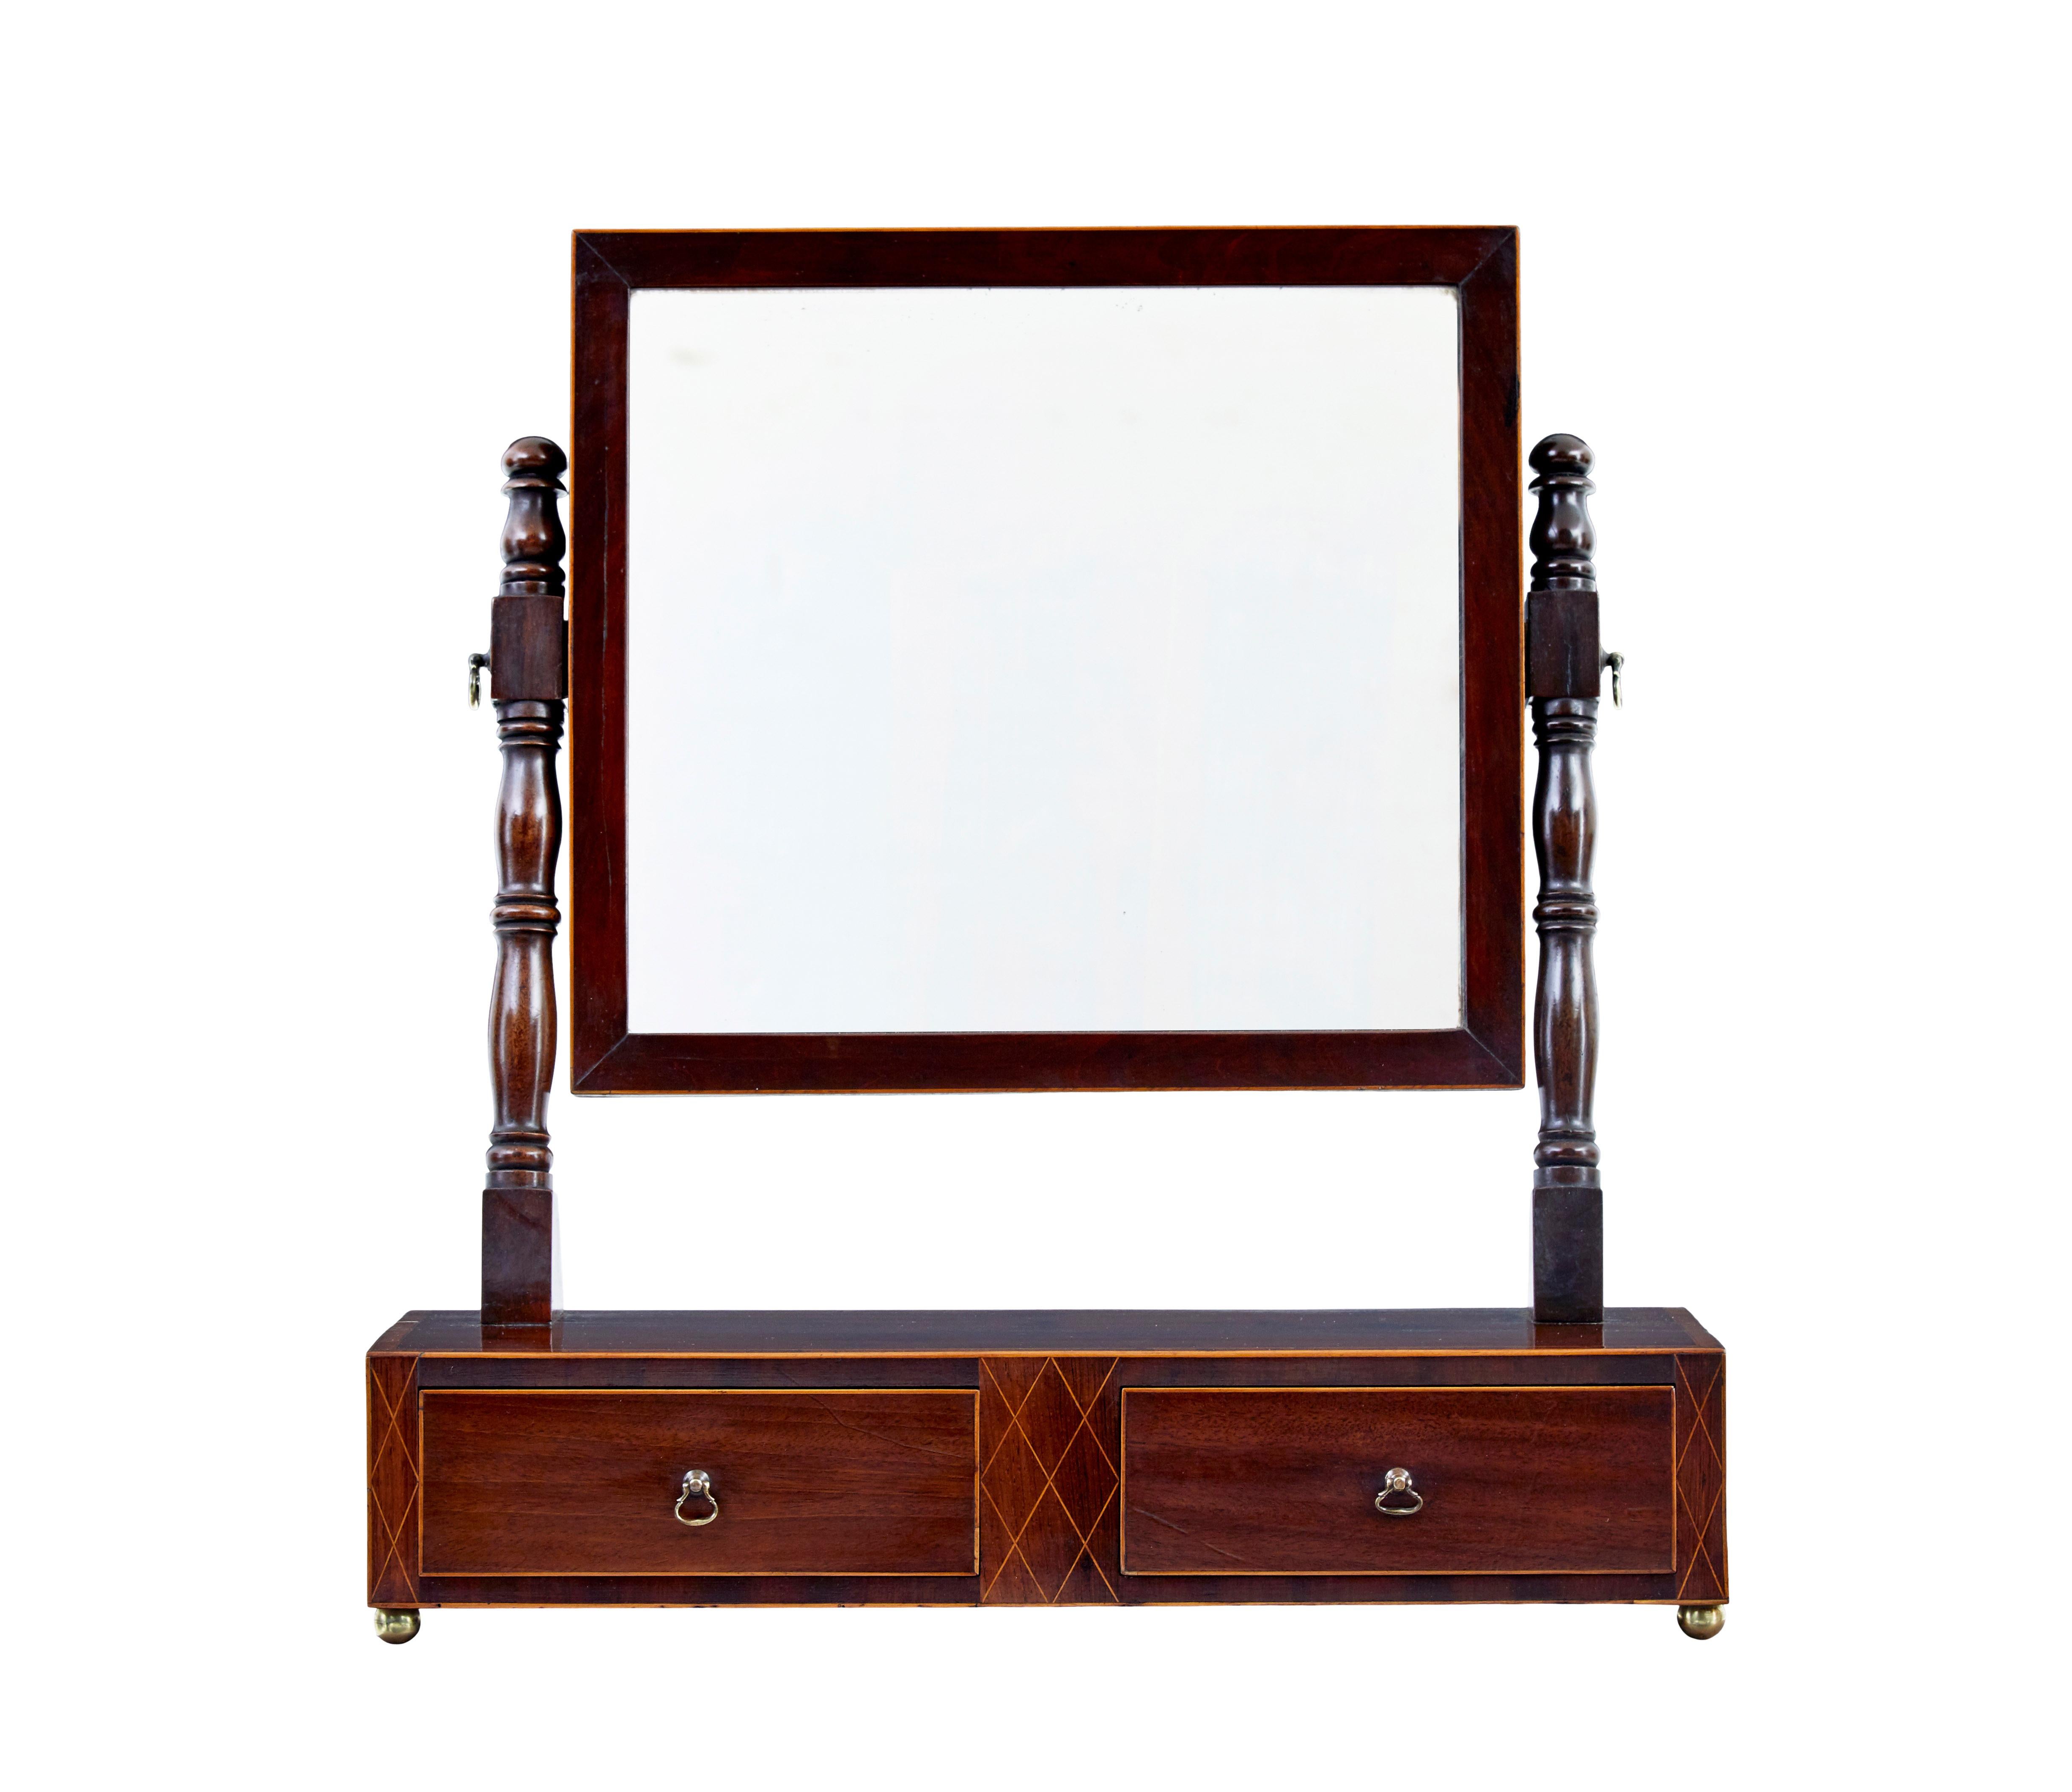 19th century Victorian mahogany toilet mirror circa 1860.

Good quality high Victorian toilet mirror, ideal for use today on a dressing table.

Mirror mounted in a bevelled frame with stringing detail, held in place by turned supports.  Rectangular